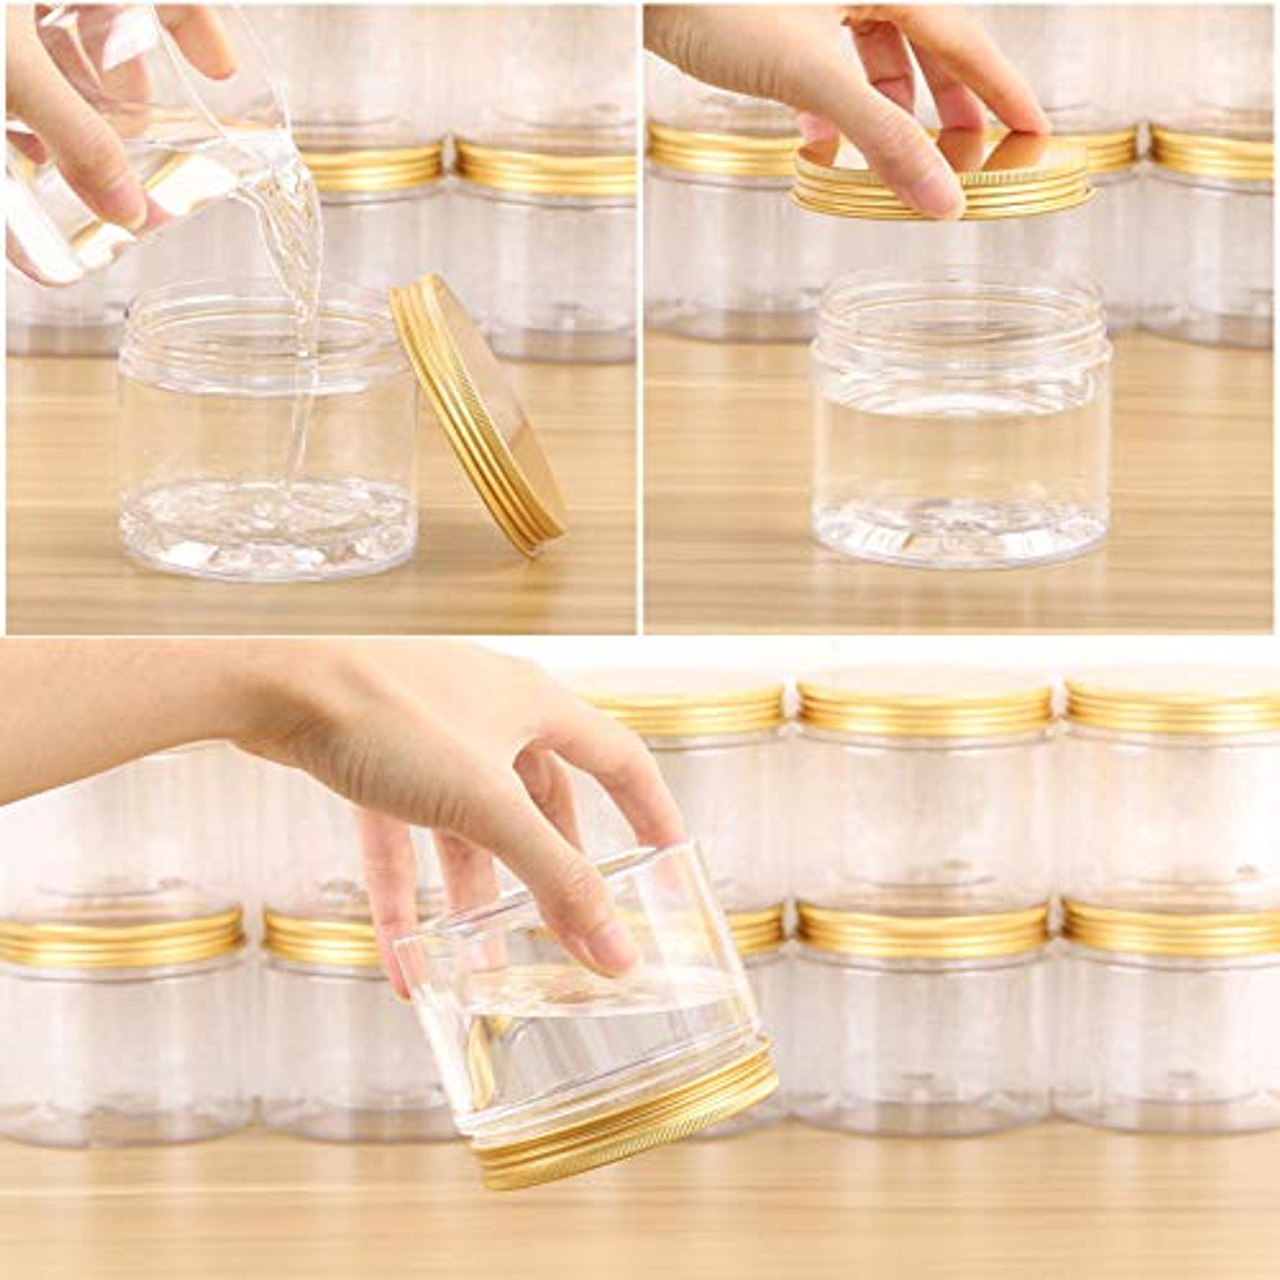 12-Pack 280ml Clear Plastic Slime Jars with Lids, Refillable Empty